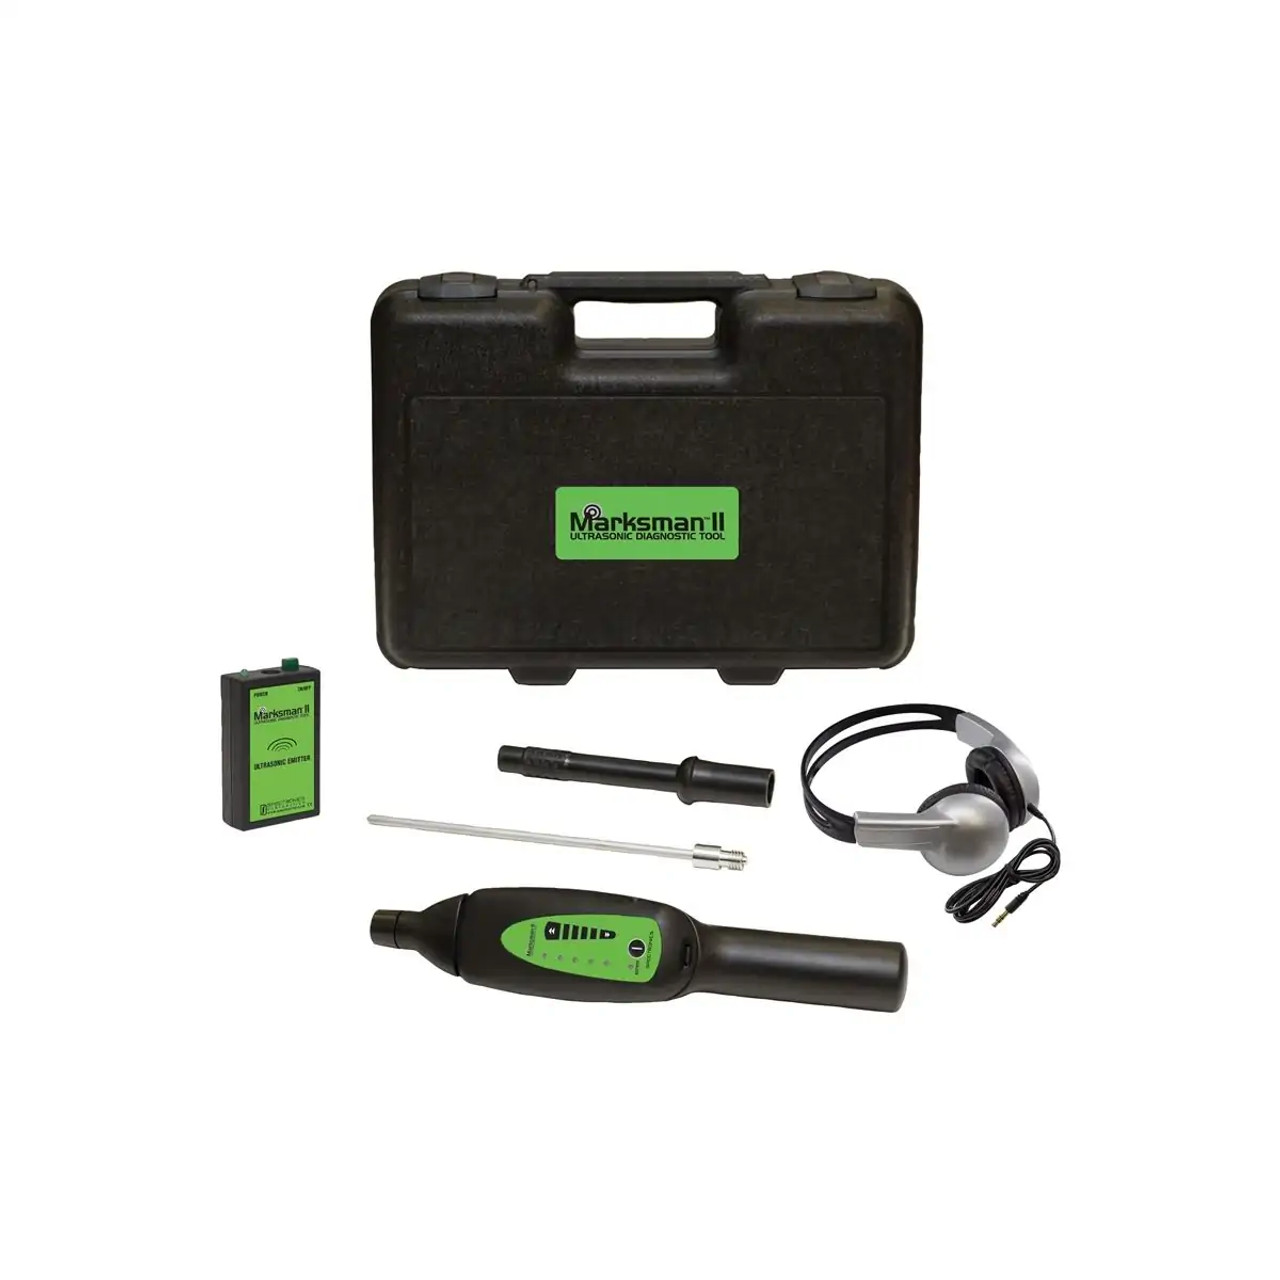 Marksman II Ultrasonic Tool with Laser Pointer (TRATP9367L)